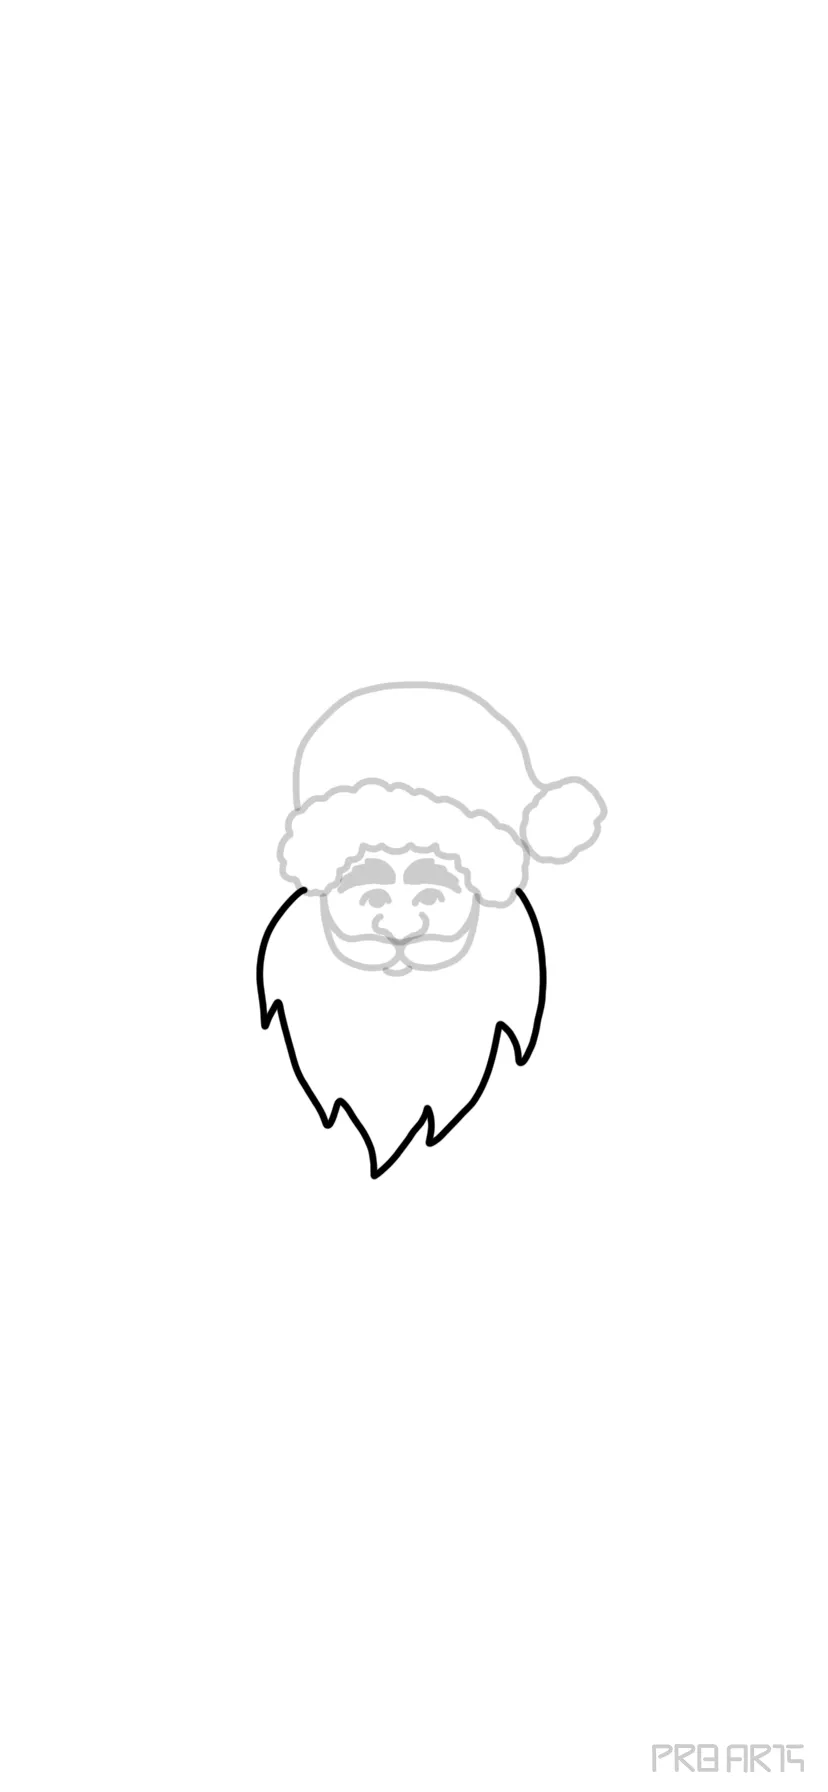 How to Draw Santa Claus in 8 Easy Steps  Tims Printables